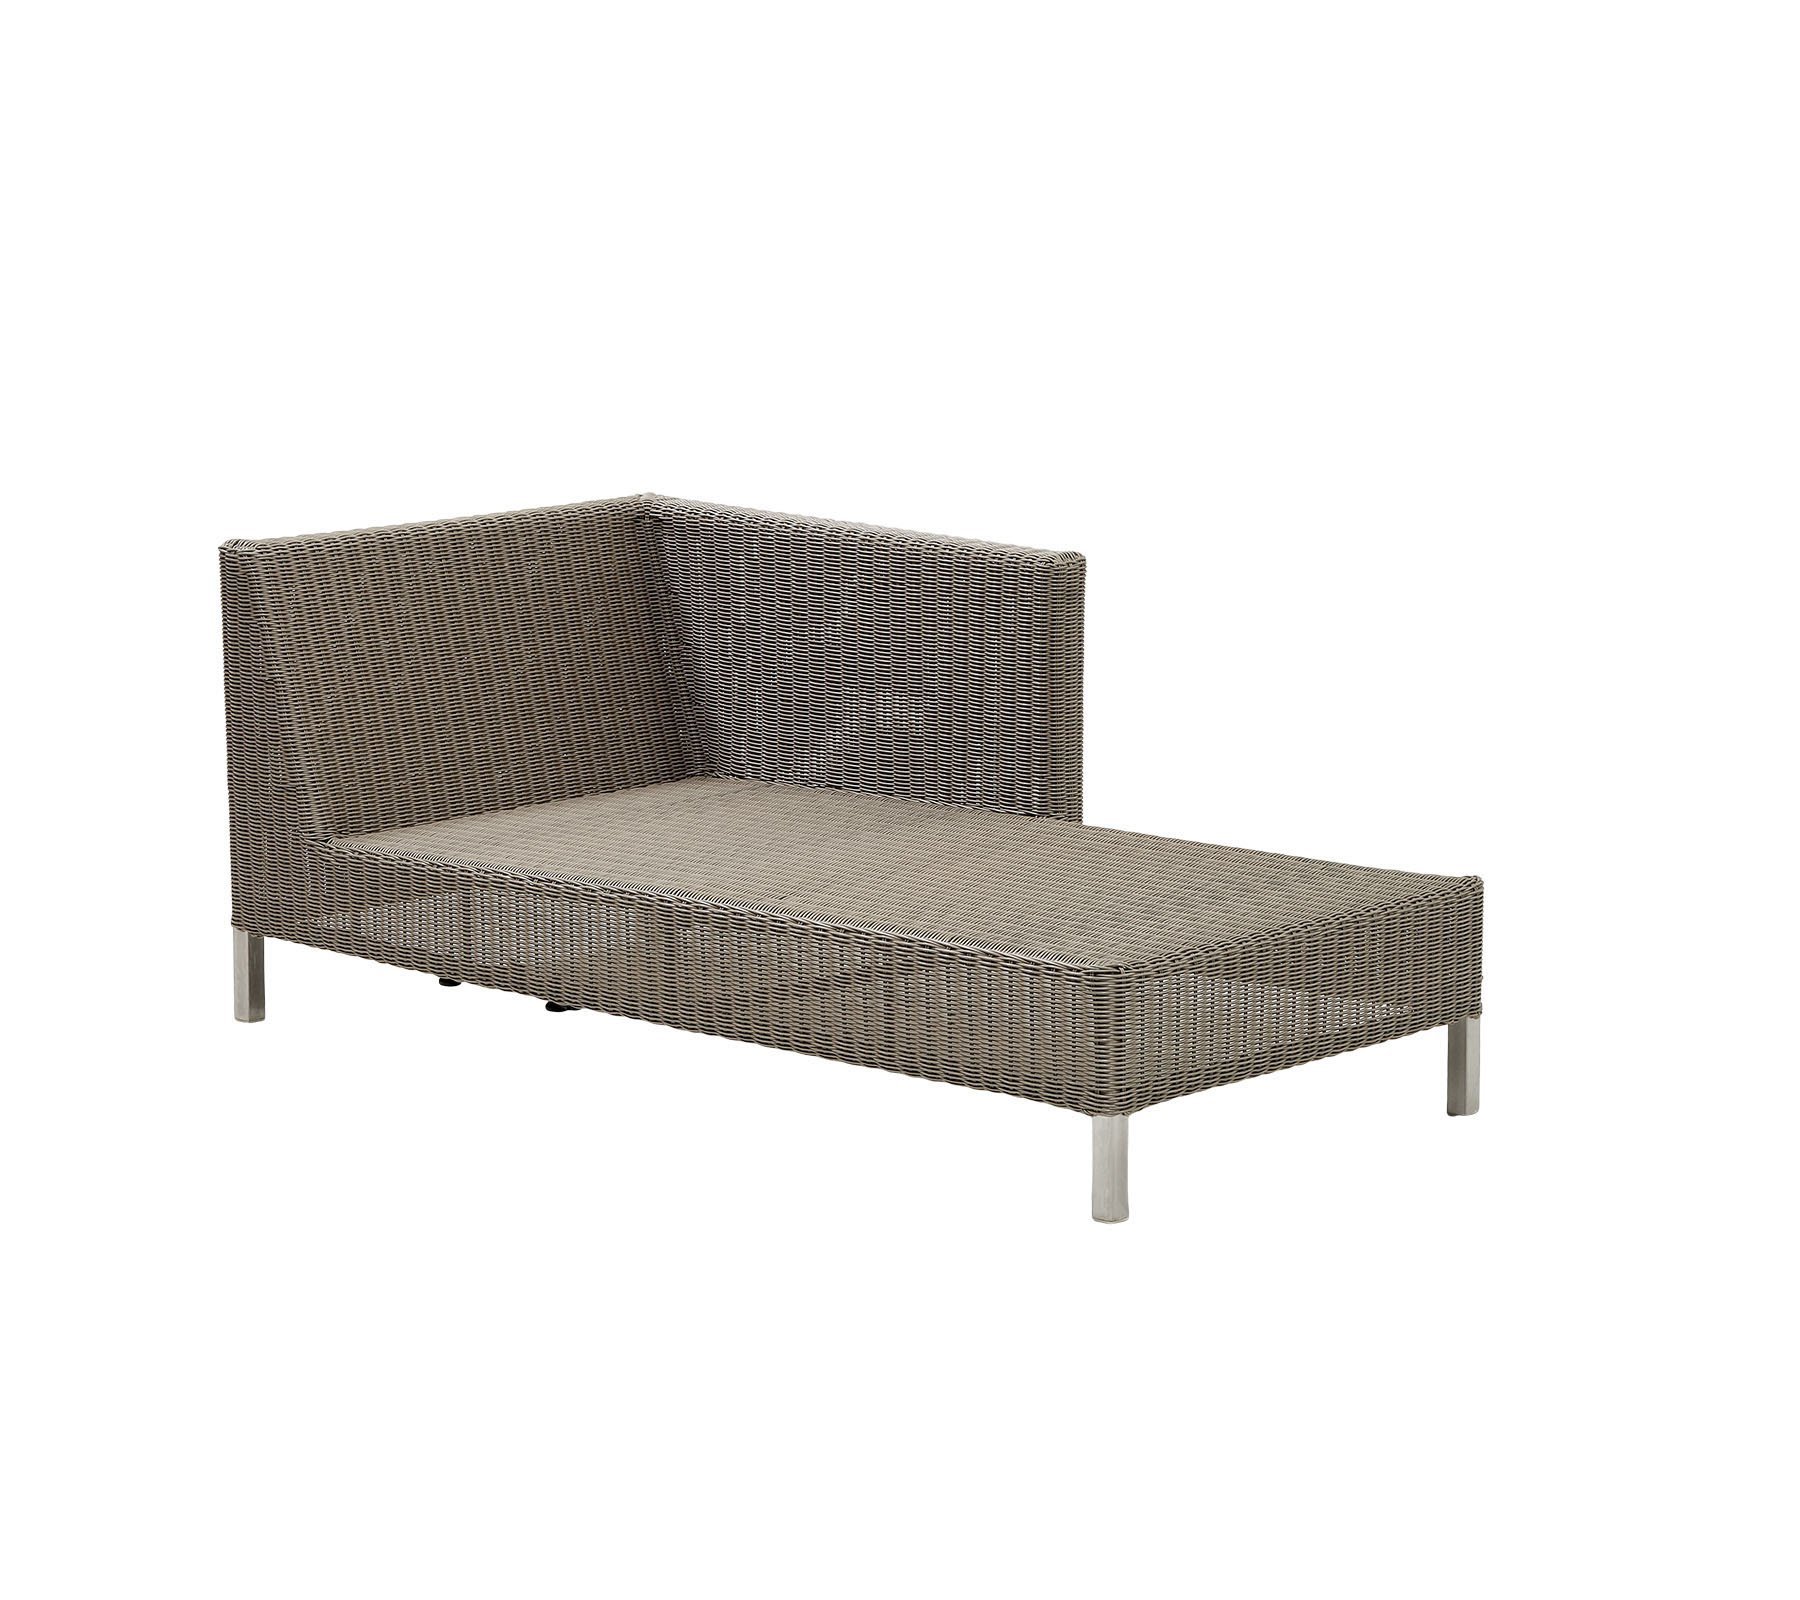 Cane-line Connect Left Chaise Lounger | Wooden | Outdoor-Patio ...